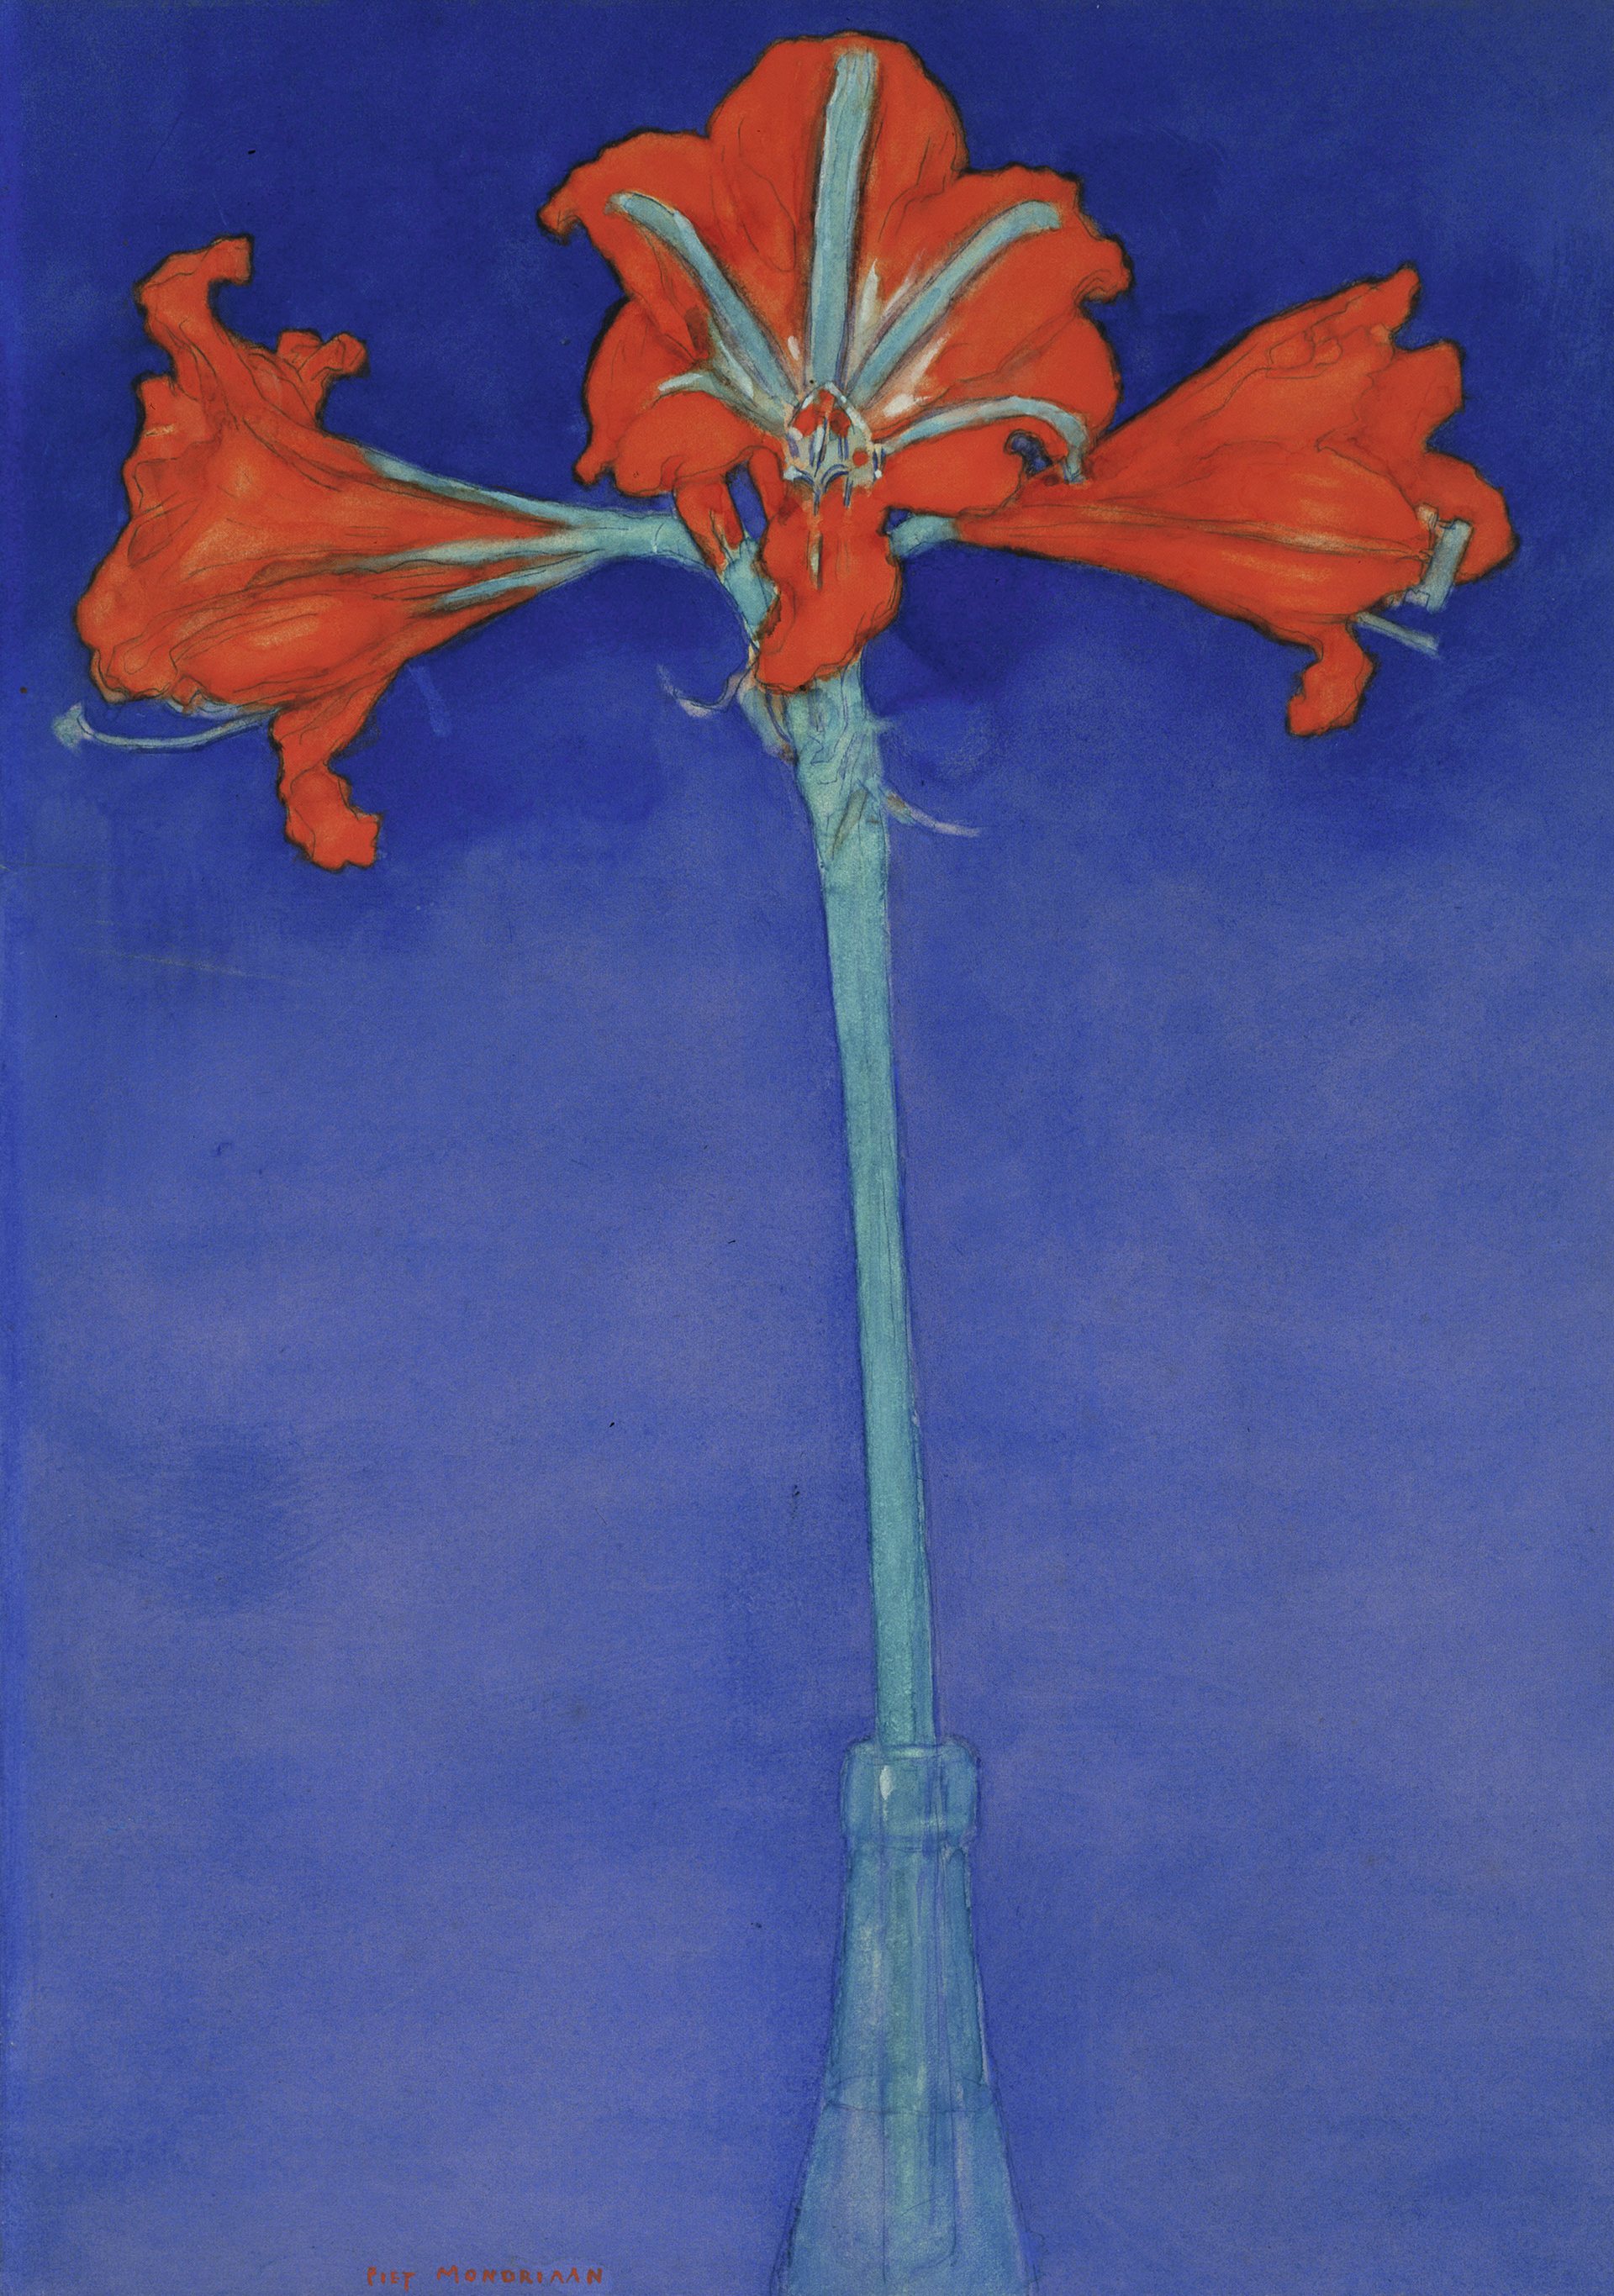 Red Amaryllis with Blue Background by Piet Mondrian - 1907 - 46.5 x 33.0 cm Museum of Modern Art